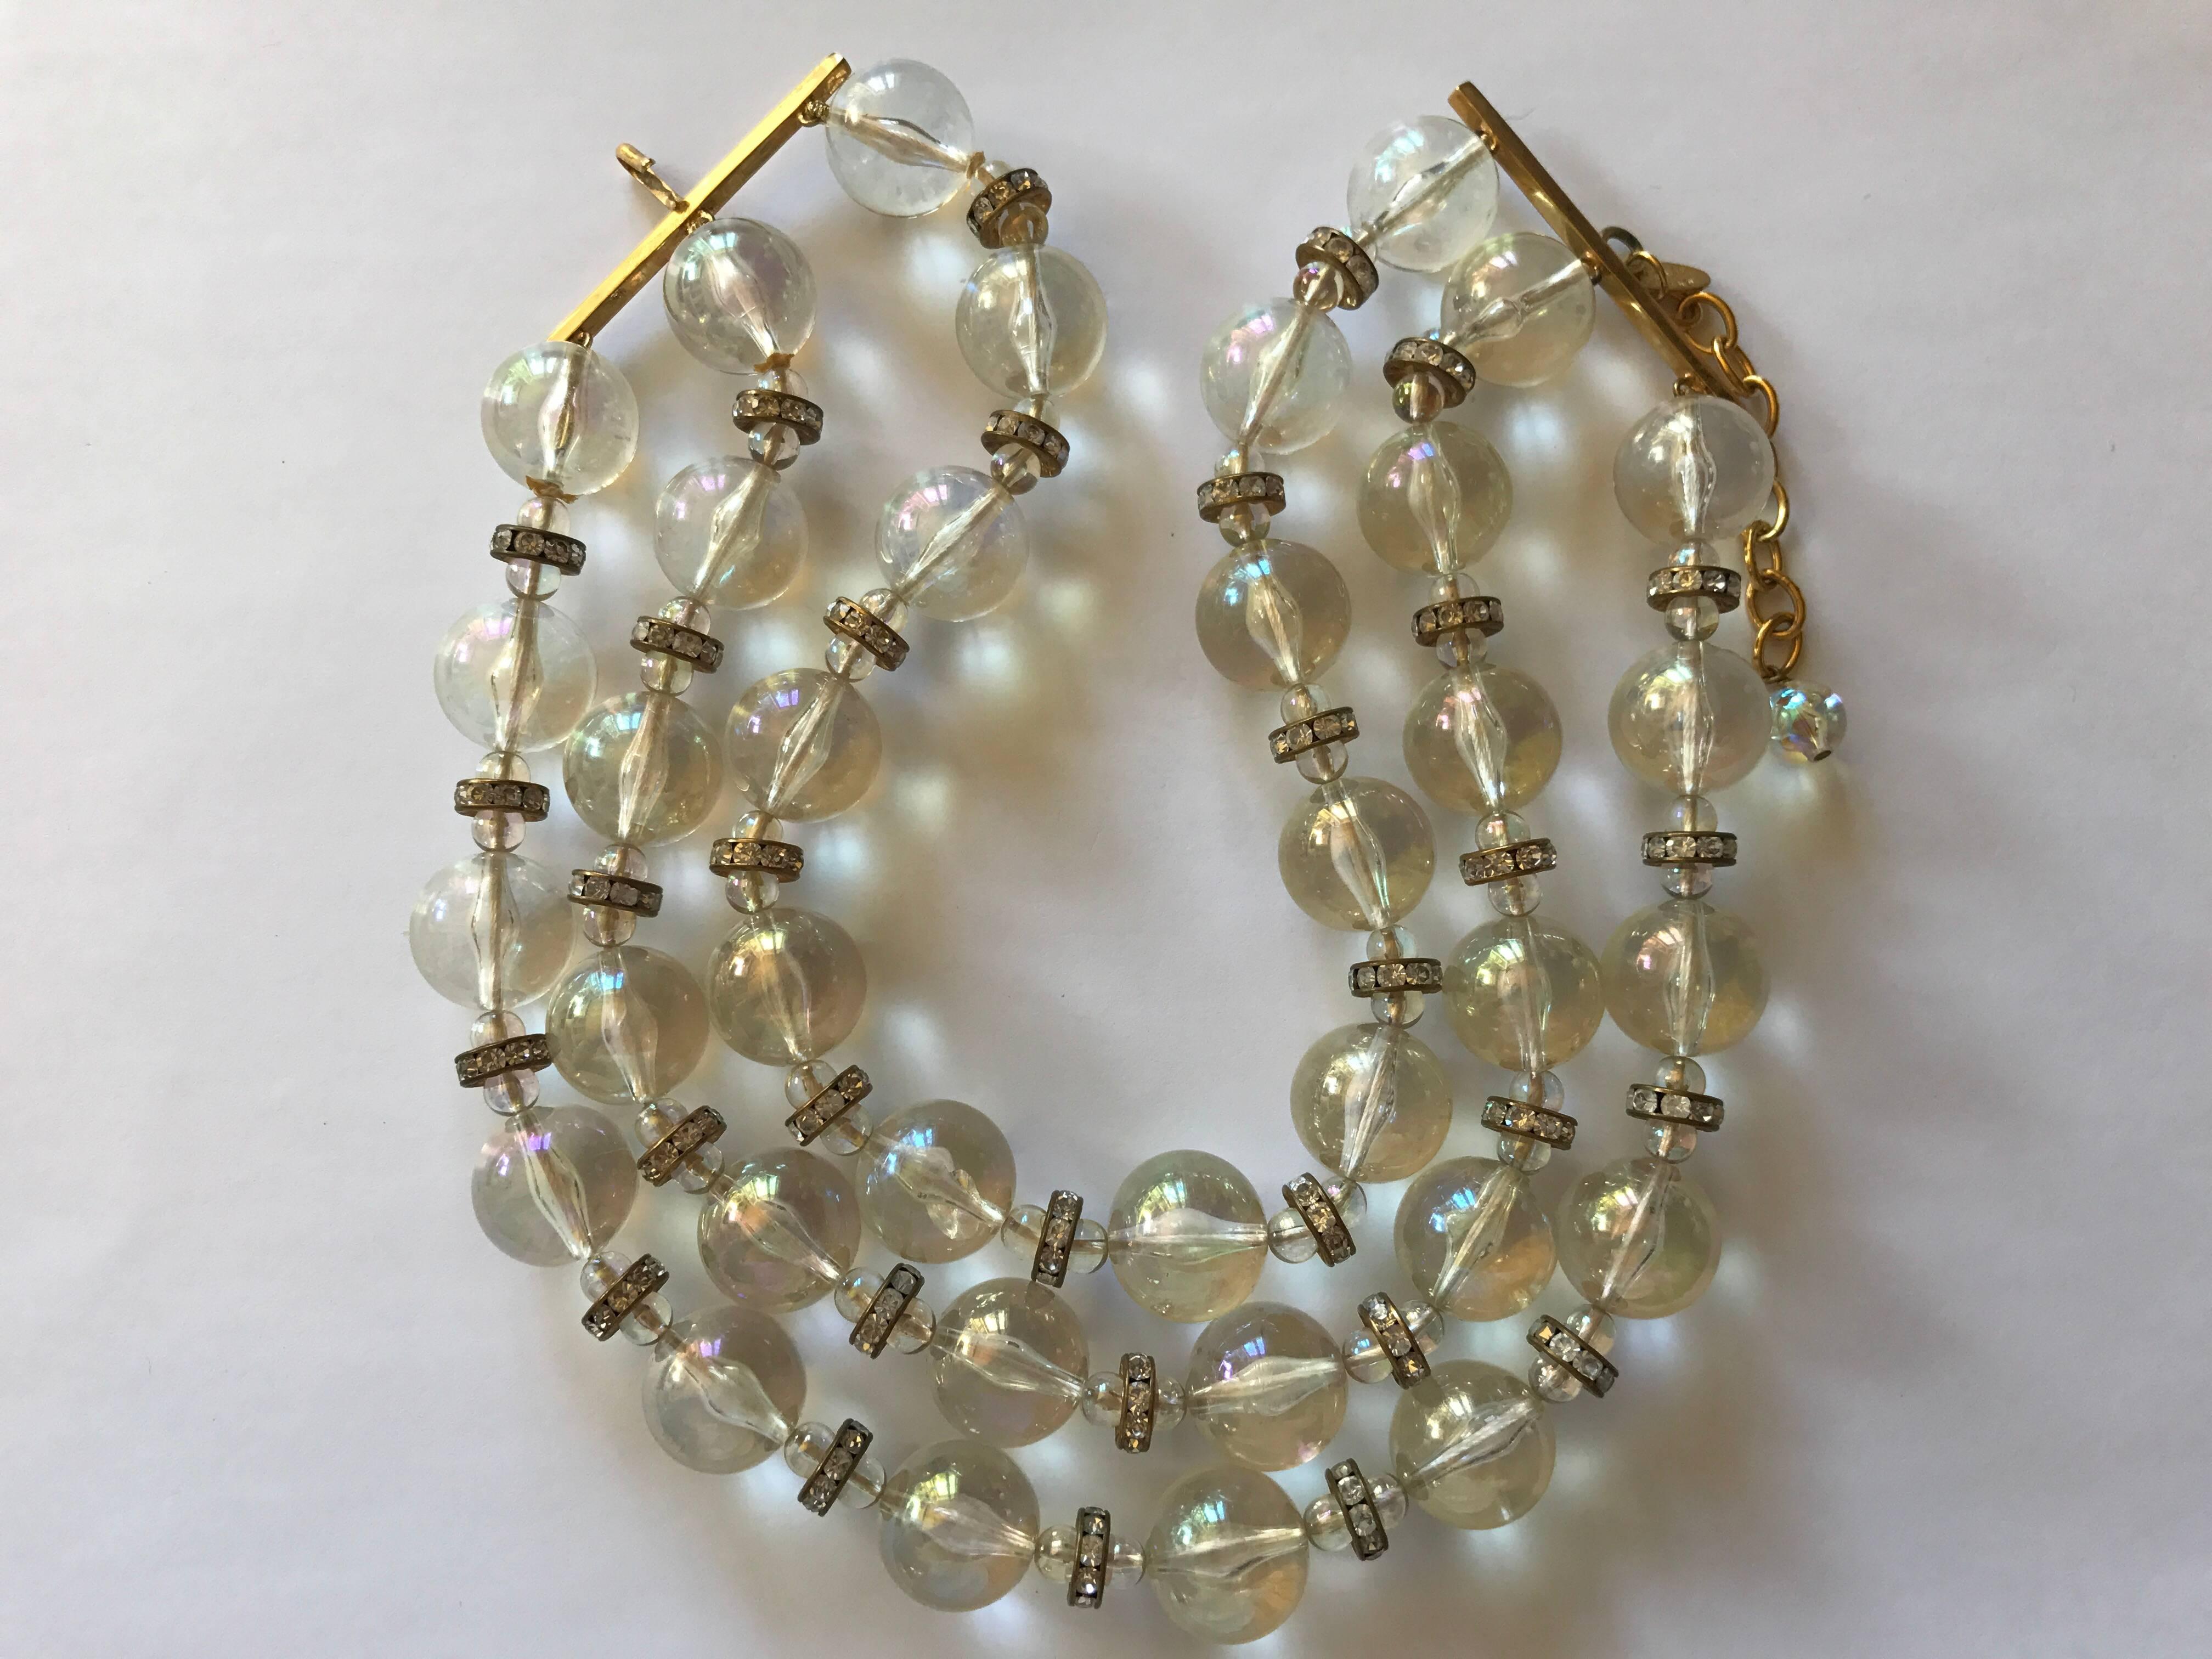 Chanel three strand acrylic beads necklace with gold hardware. The beads have an aurora borealis sheen and are interspersed with the same smaller beads and gold toned  rondelle beads with clear crystals. The height is 2 1/4 inches and the length of